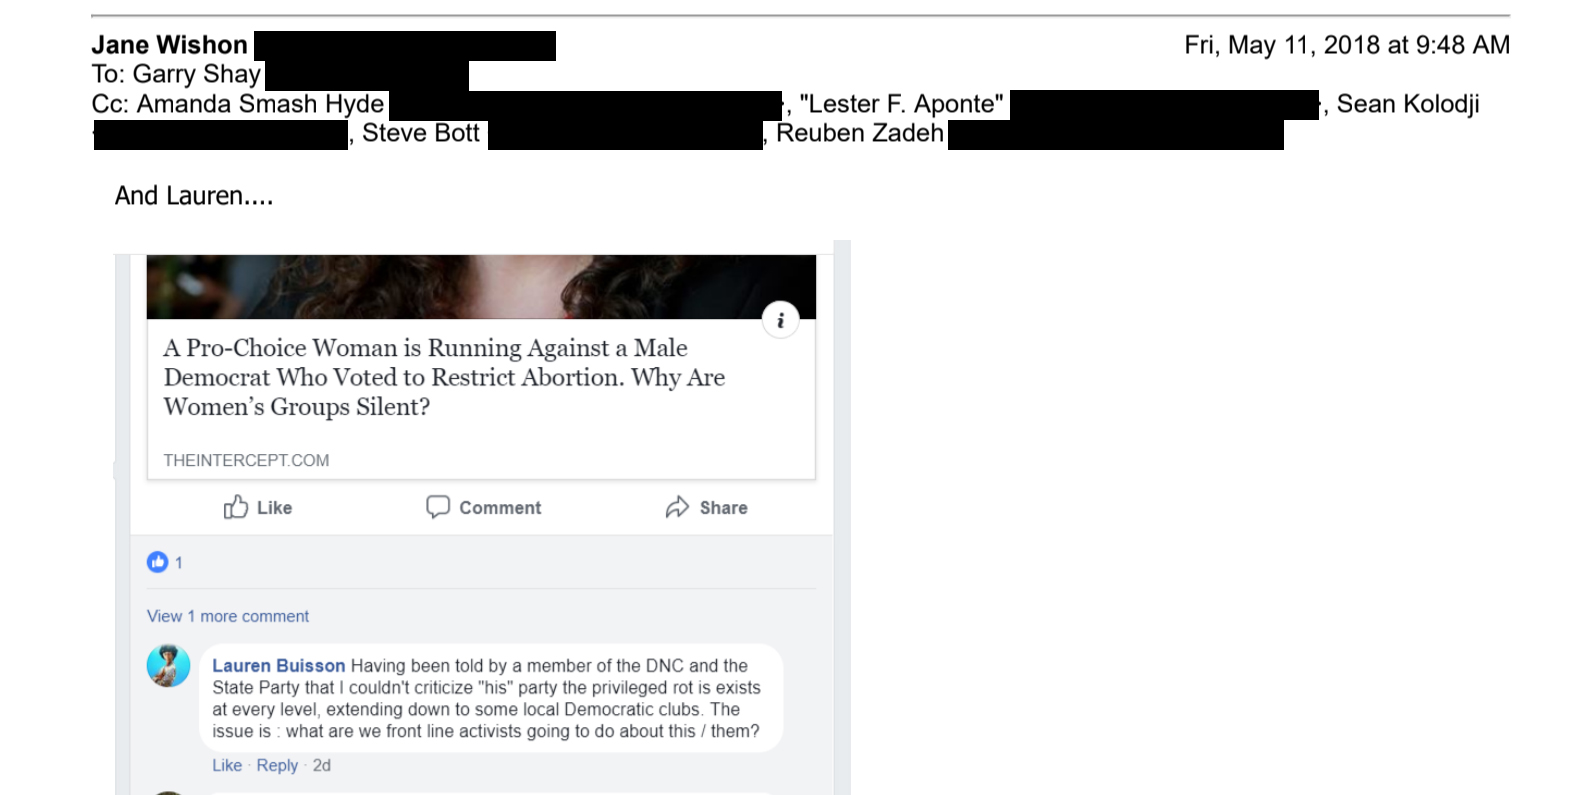 A screen shot of a Facebook post that was embedded in an email. The Facebook post is a link to an article with the headline "A Pro-Choice Woman is Running Against a Male Democrat Who Voted to Restrict Abortion. Why Are Women's Groups Silent?" and a comment from Lauren Buisson that reads: "Having been told be a member of the DNC and the State Party that I couldn't criticize "his" party the priviledged rot is exists at every level, extending down to some local Democratic clubs. The issue is- what are we front line activists going to do about this/them?"